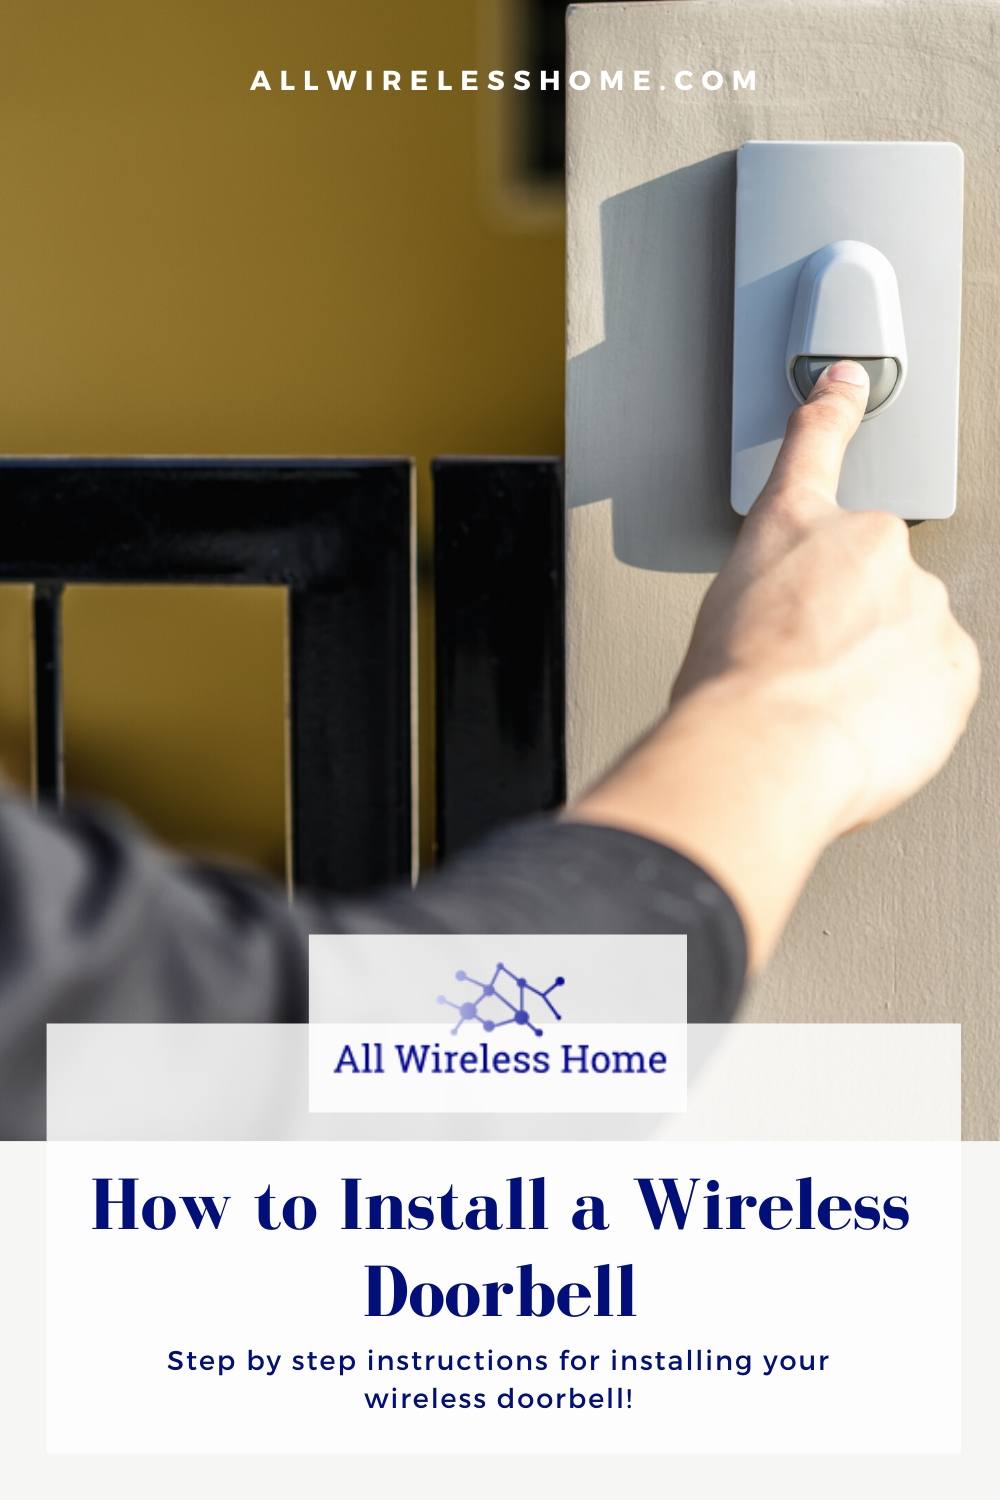 How to Install a Wireless Doorbell